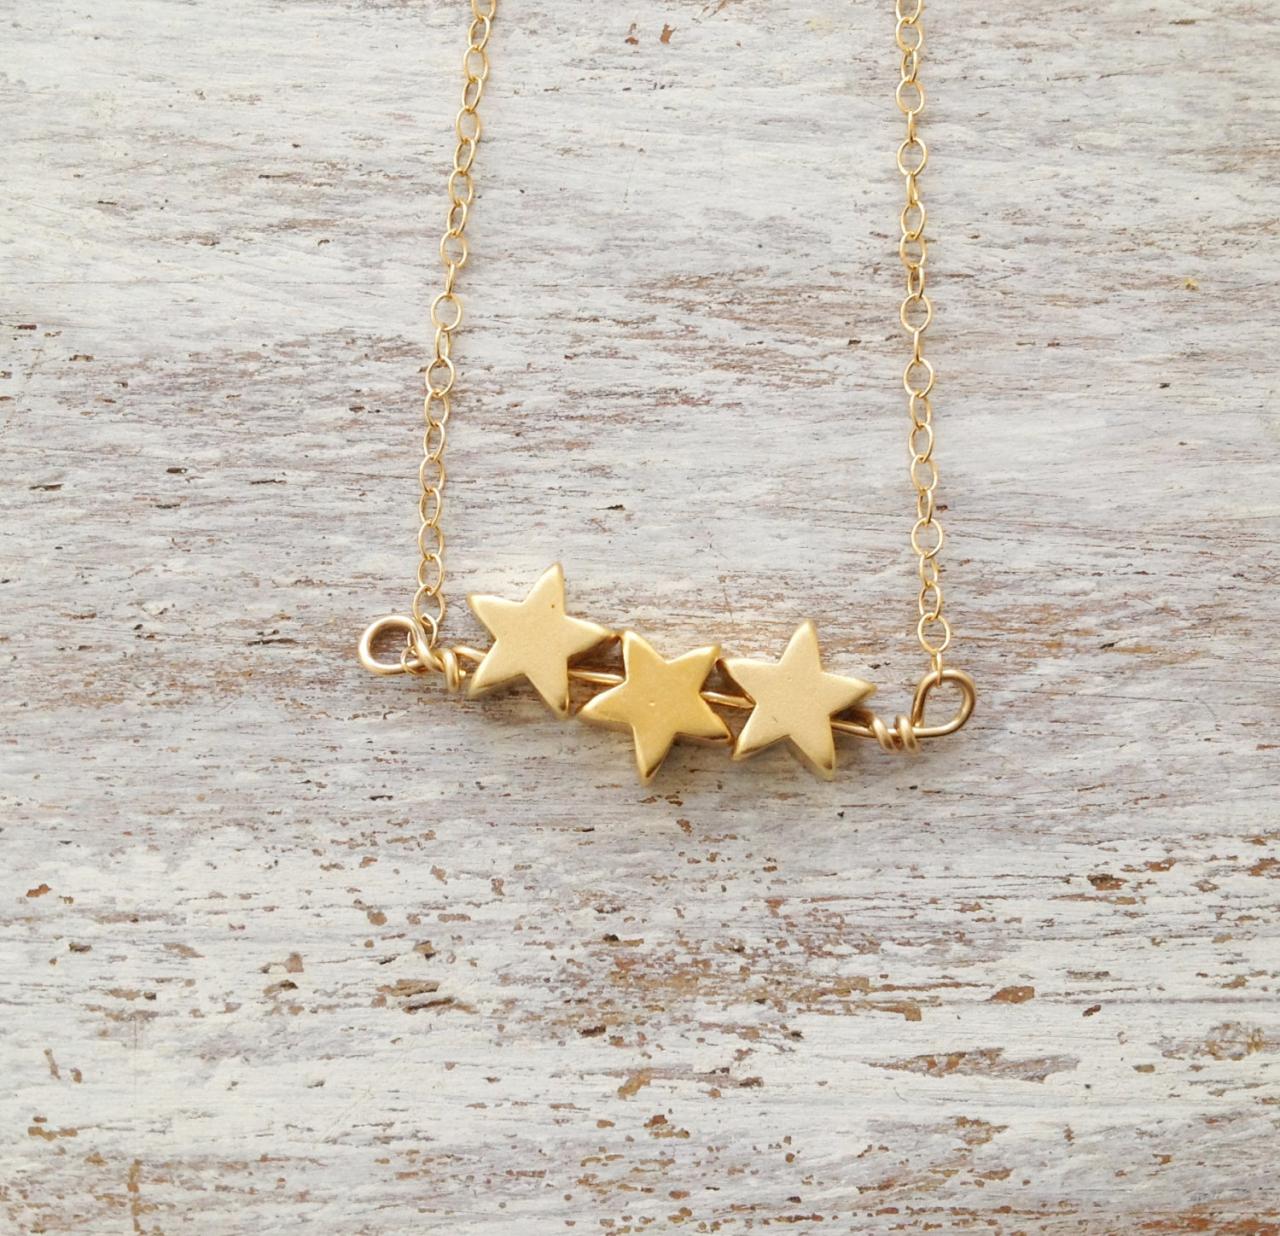 Gold Necklace, Star Necklace, Star Bead, Simple Necklace, Stars, Everyday Necklace, Tiny Gold Necklace,1 Petite Jewelry - D13